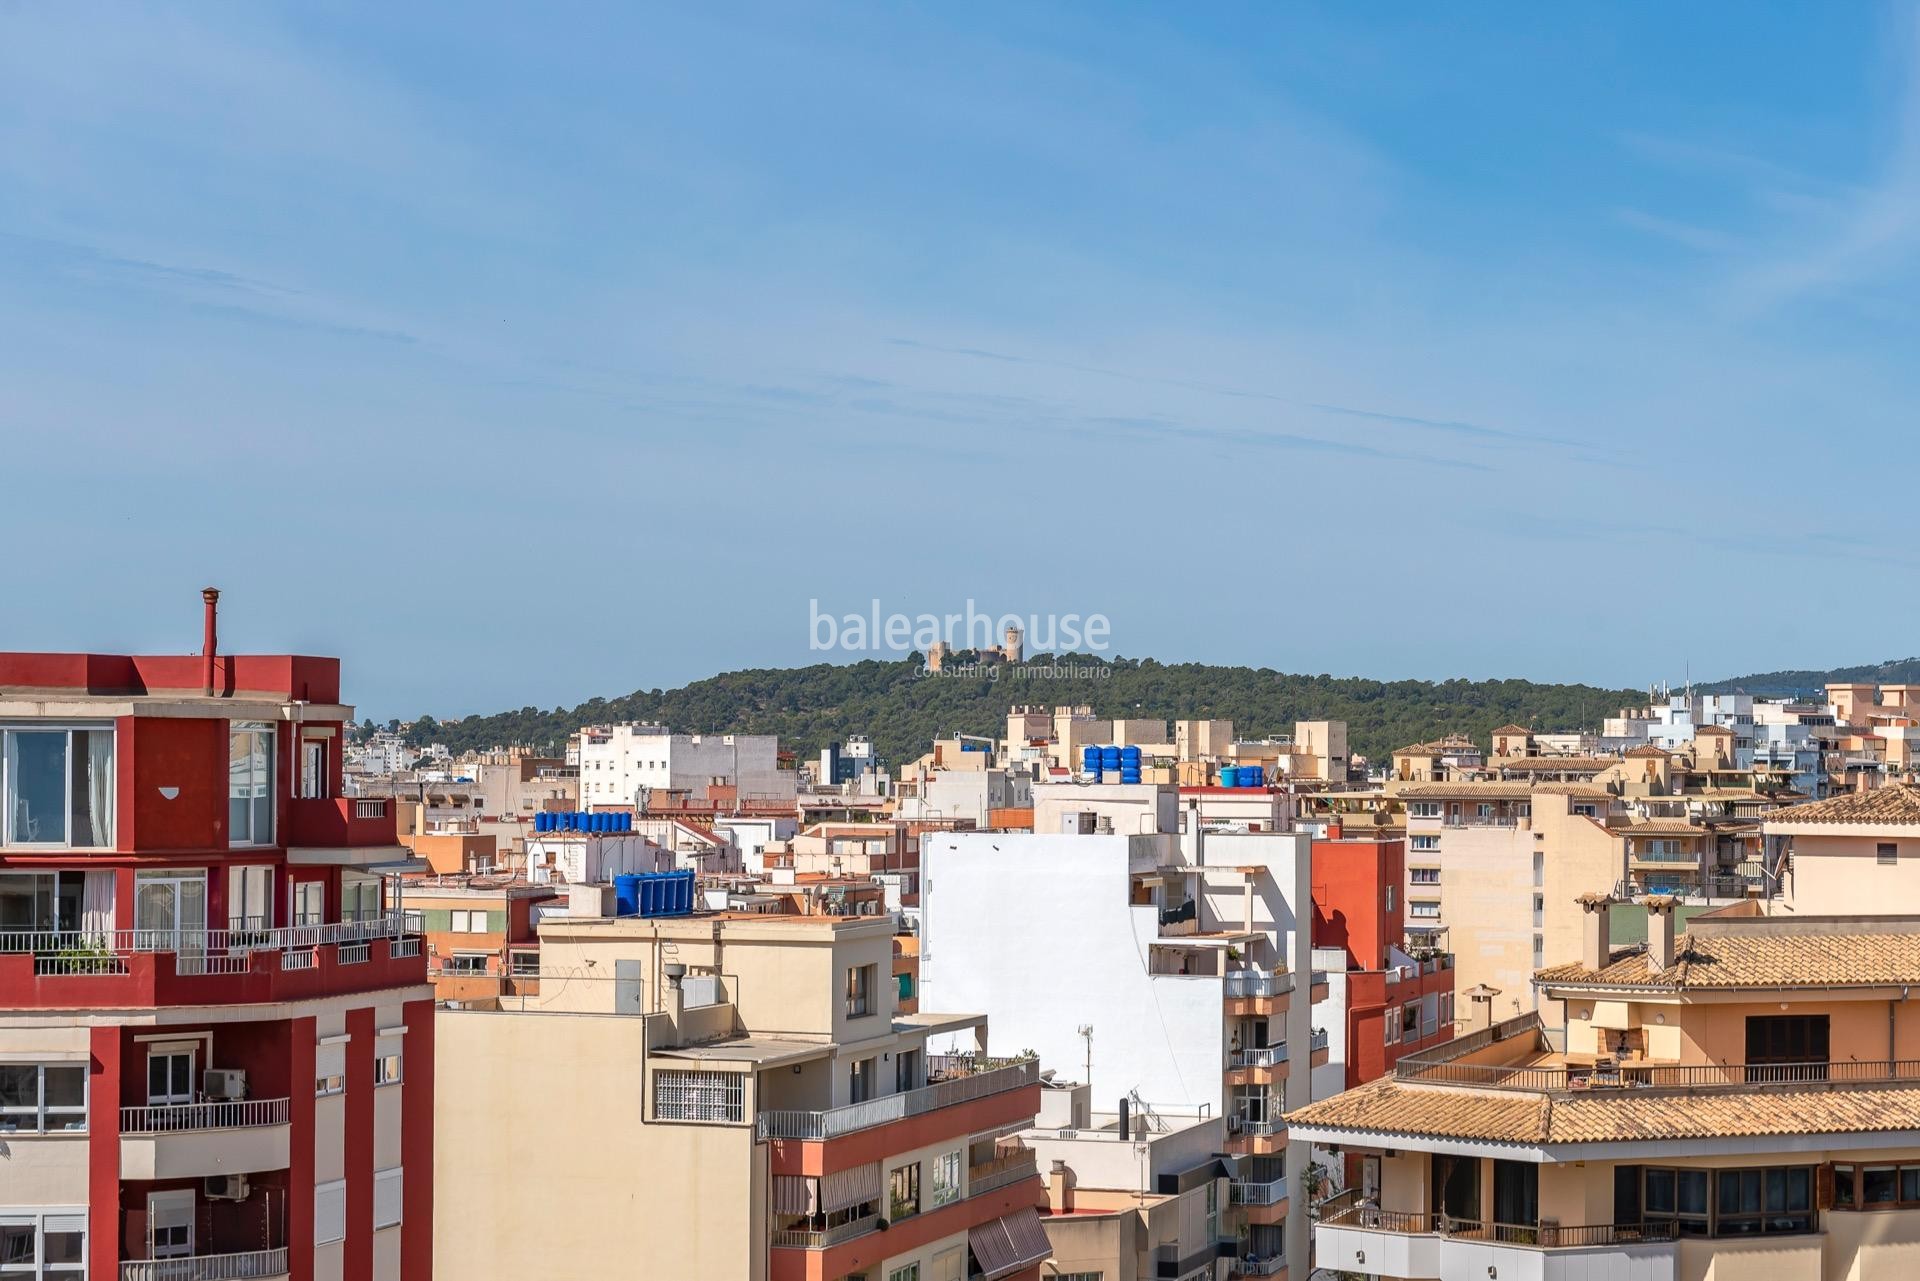 Bright renovated penthouse with beautiful modern design and large terrace in the center of Palma